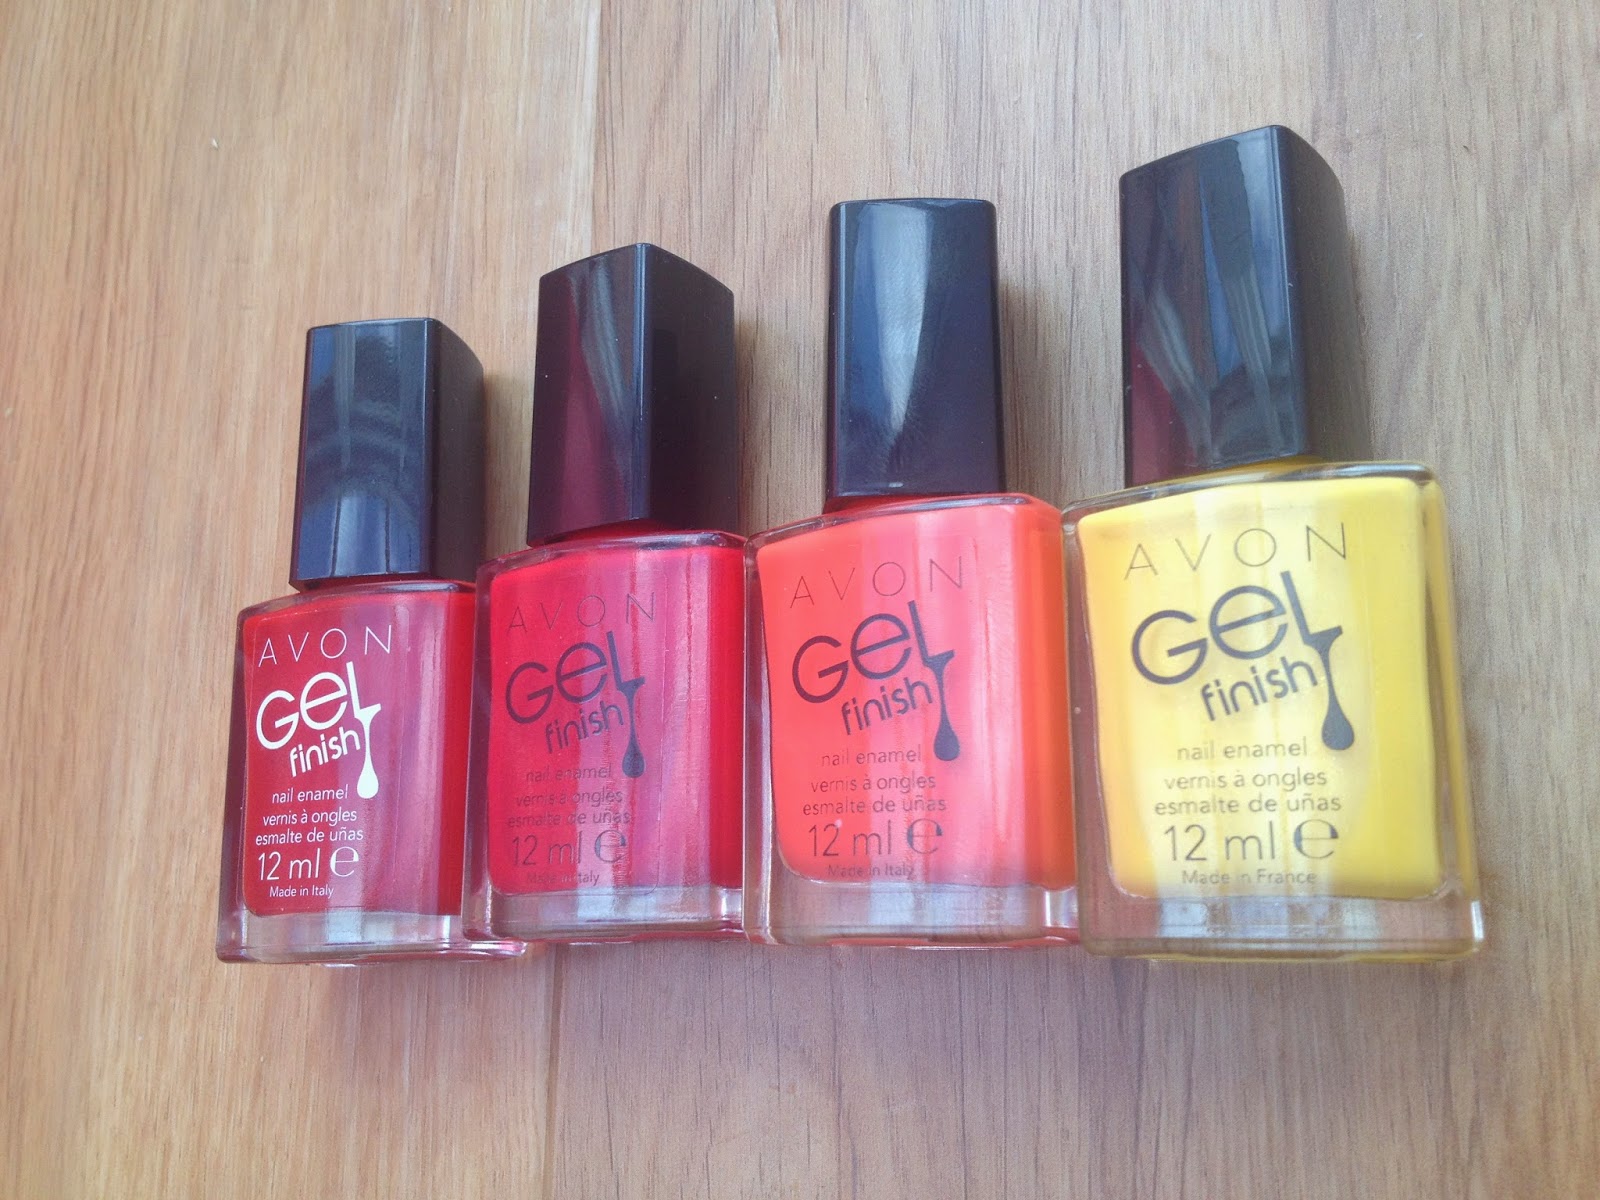 Hobbsessed.: Avon Party & Gel Nail Polish Launch / Avon's Arrived